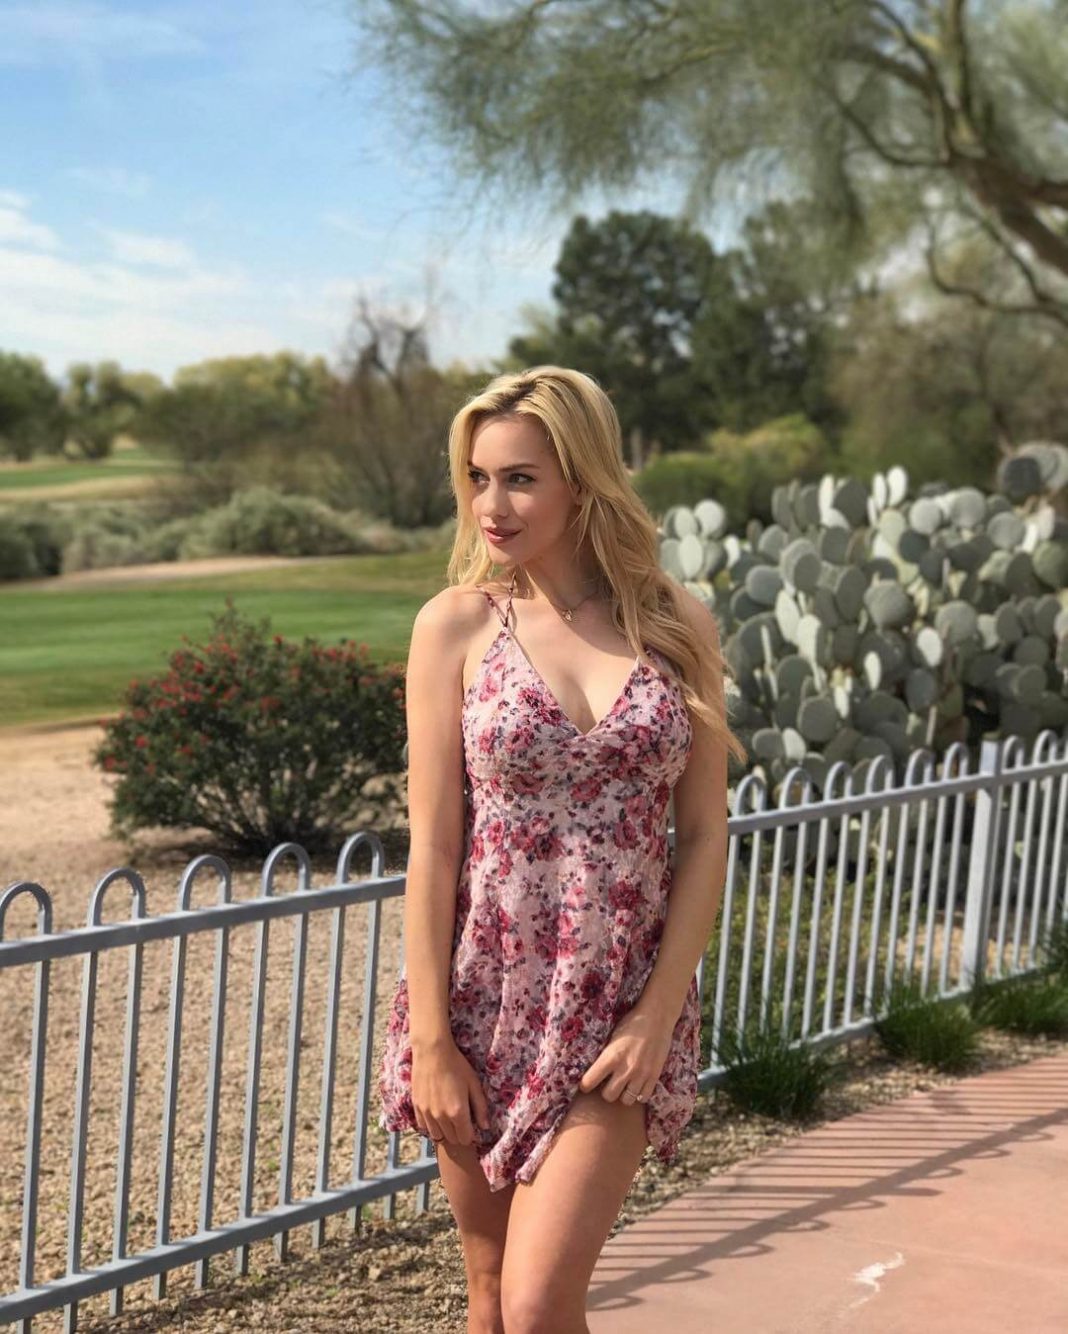 51 Paige Spiranac Nude Pictures Brings Together Style, Sassiness And Sexiness 280